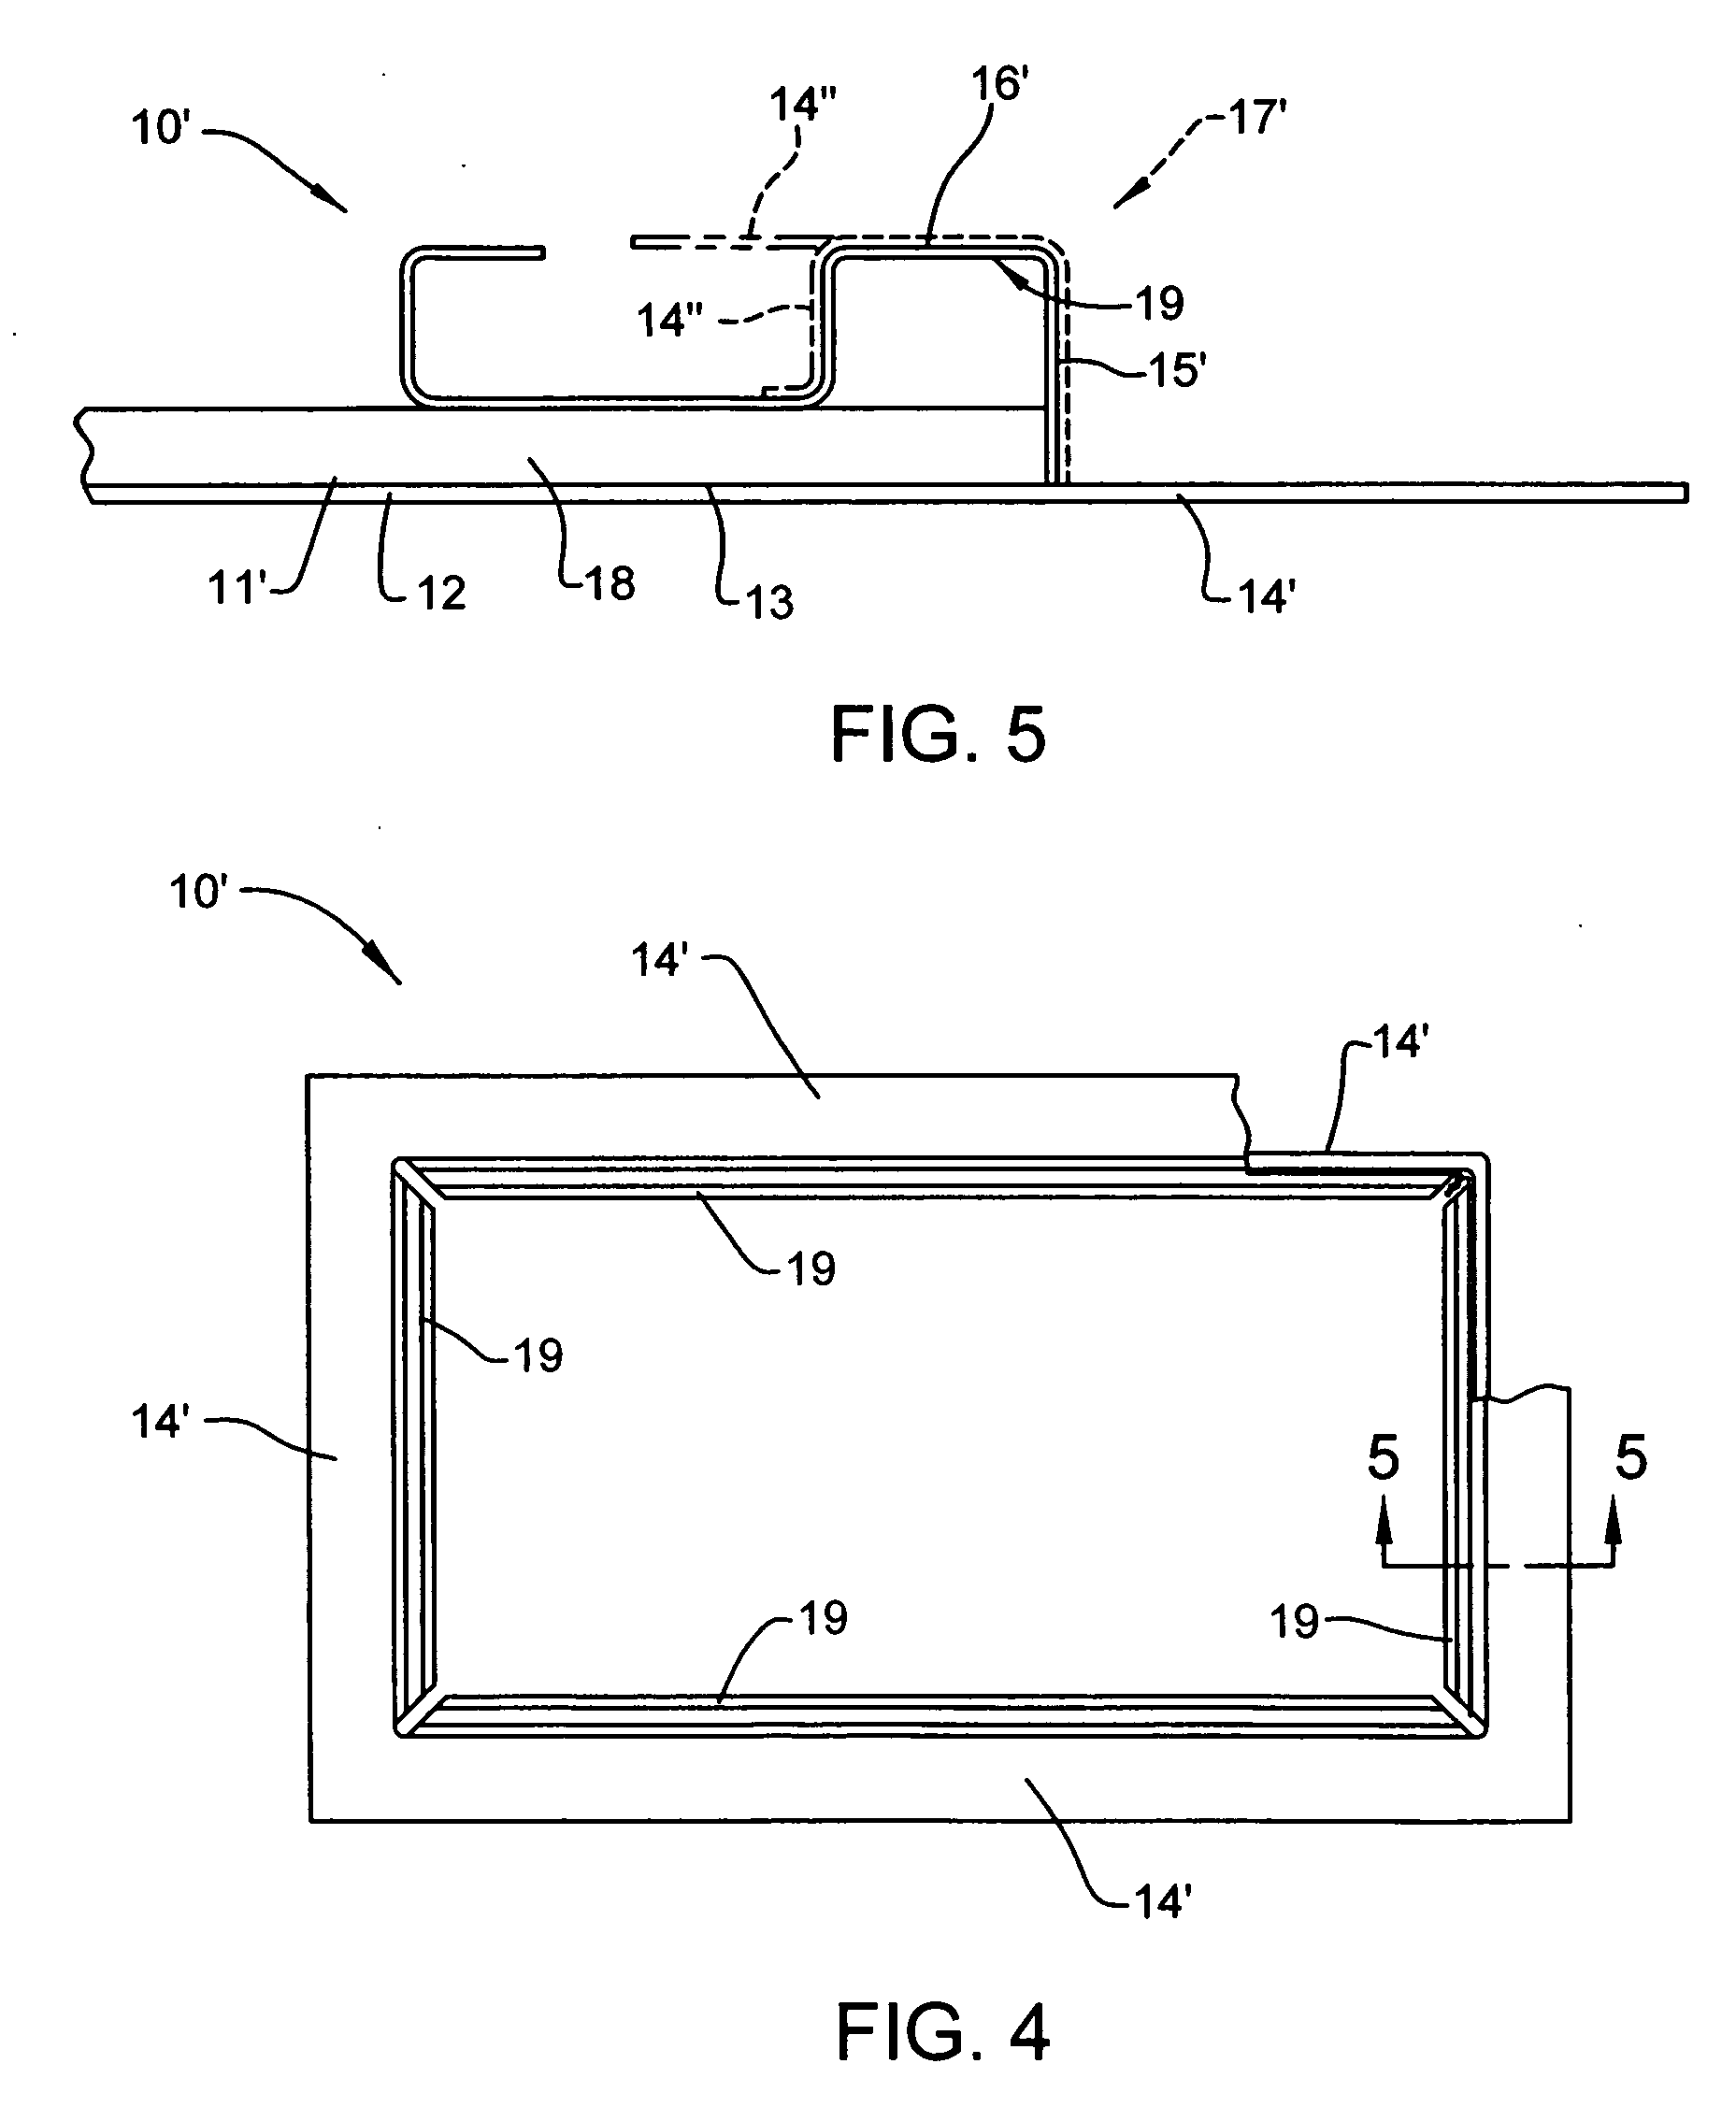 Process and apparatus for edge wrapping upholstered articles